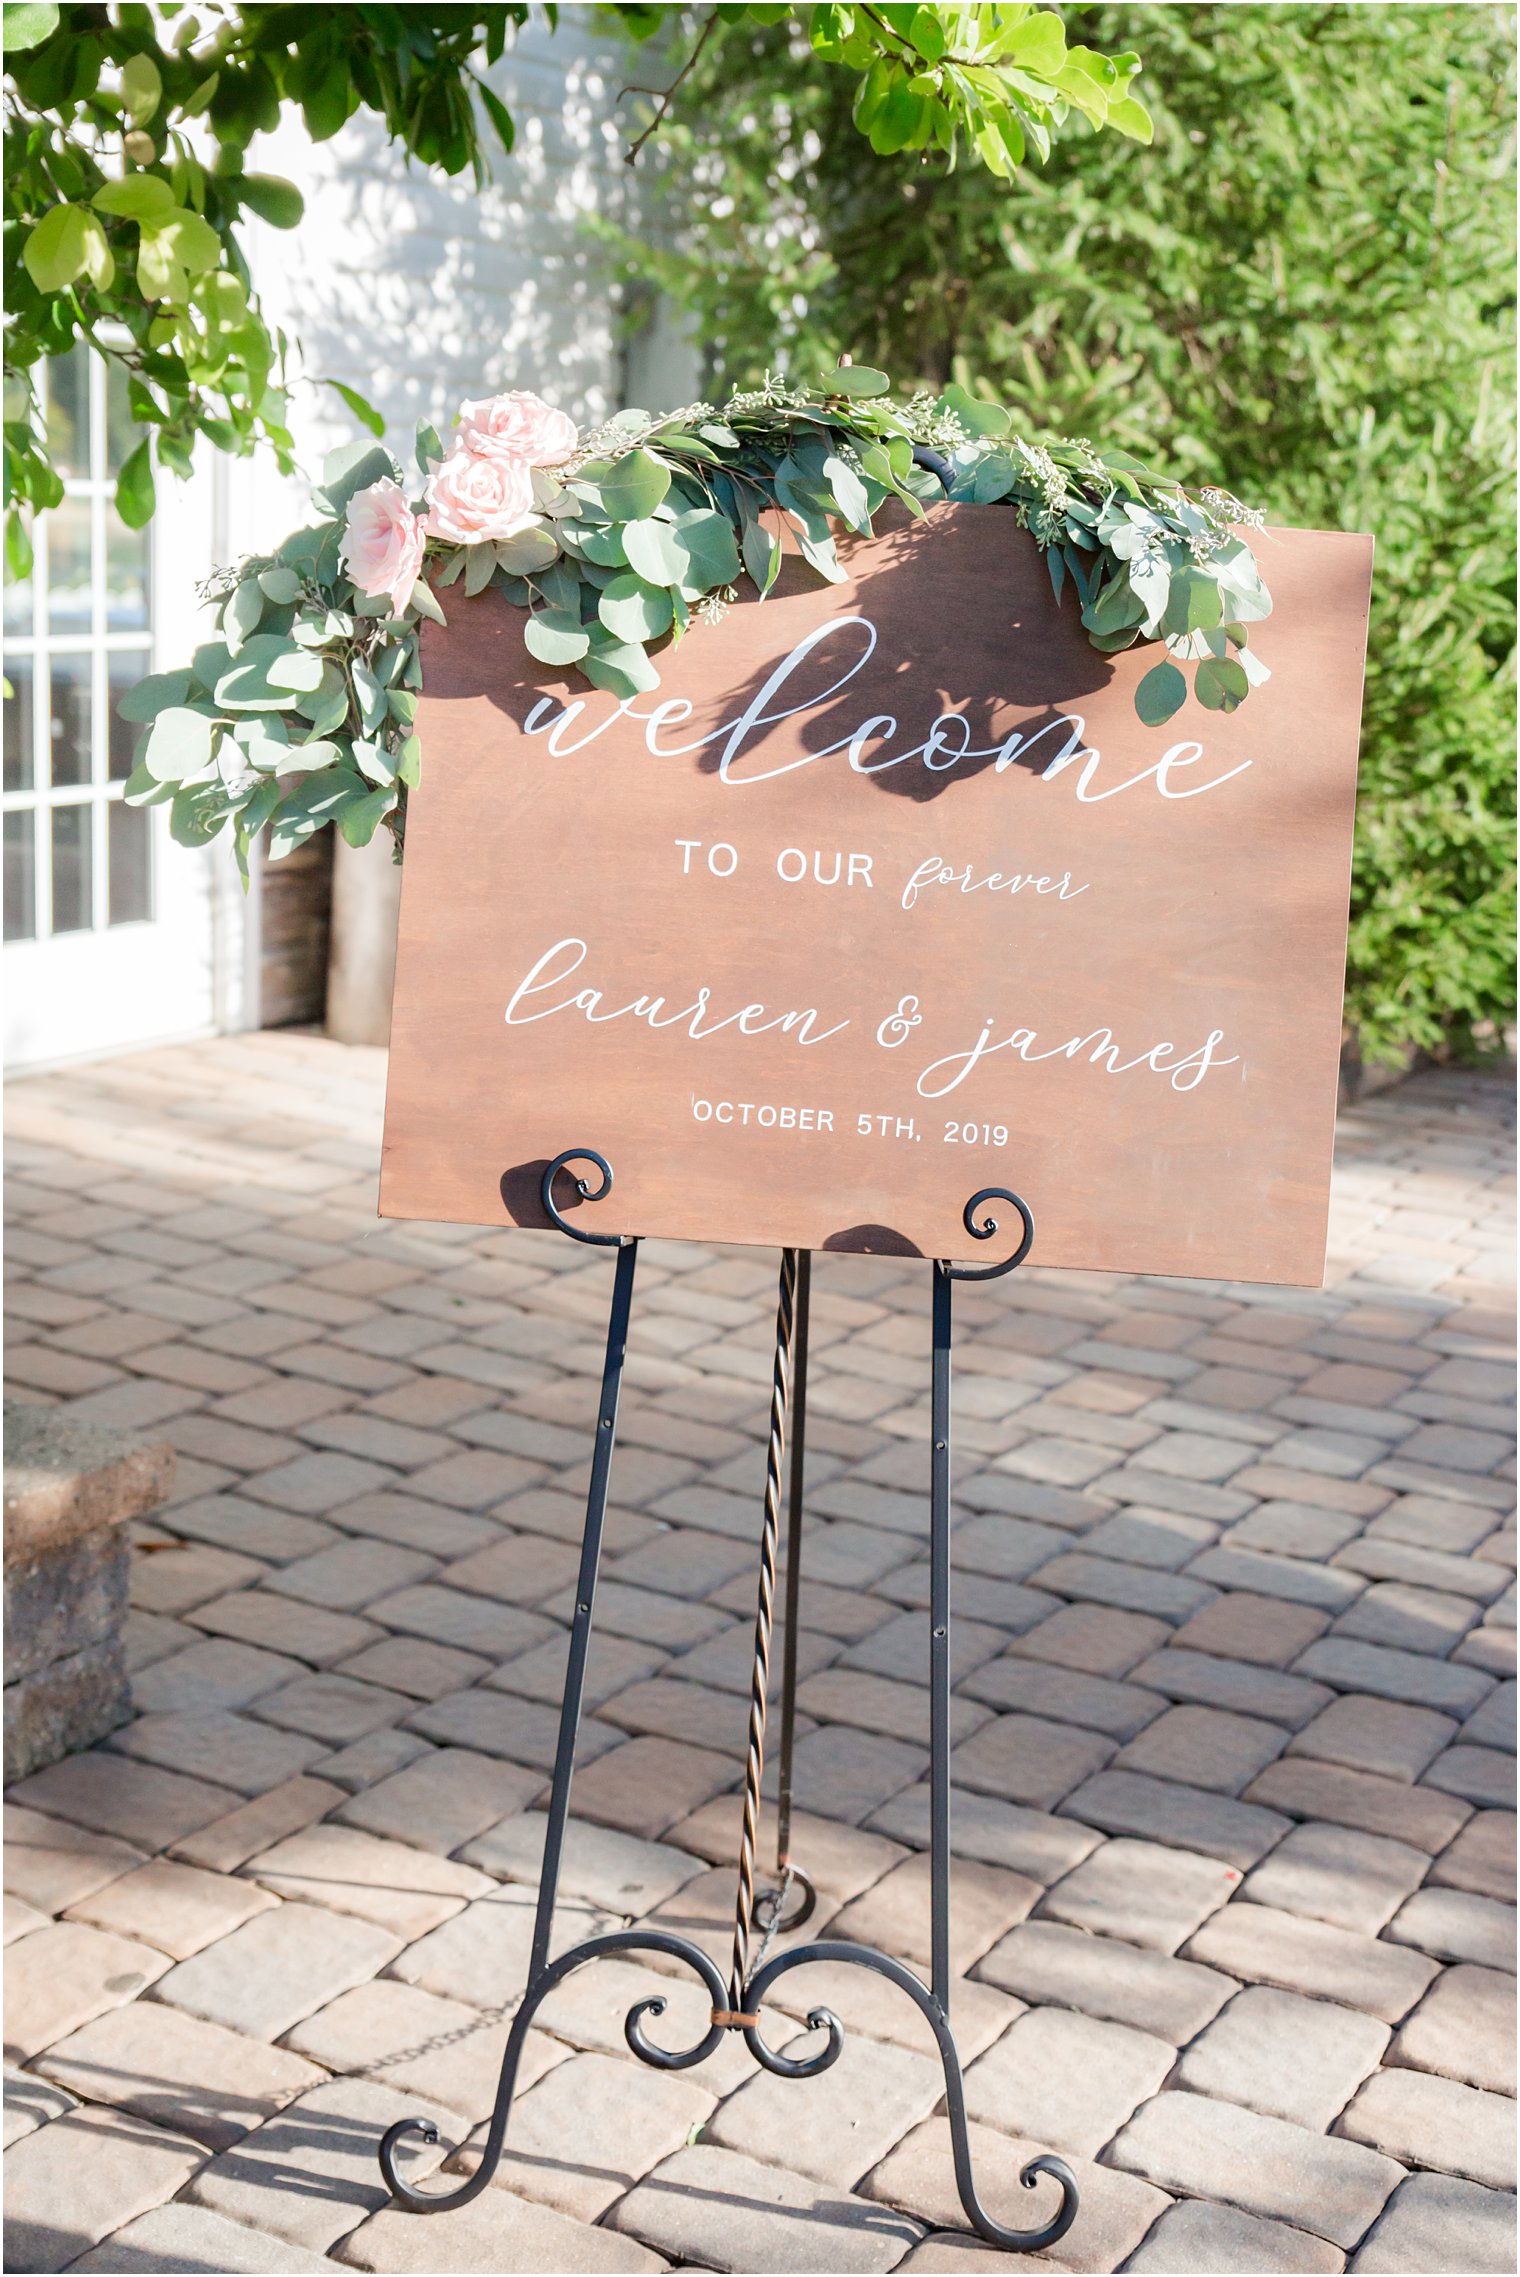 Wedding welcome sign in wood with greenery